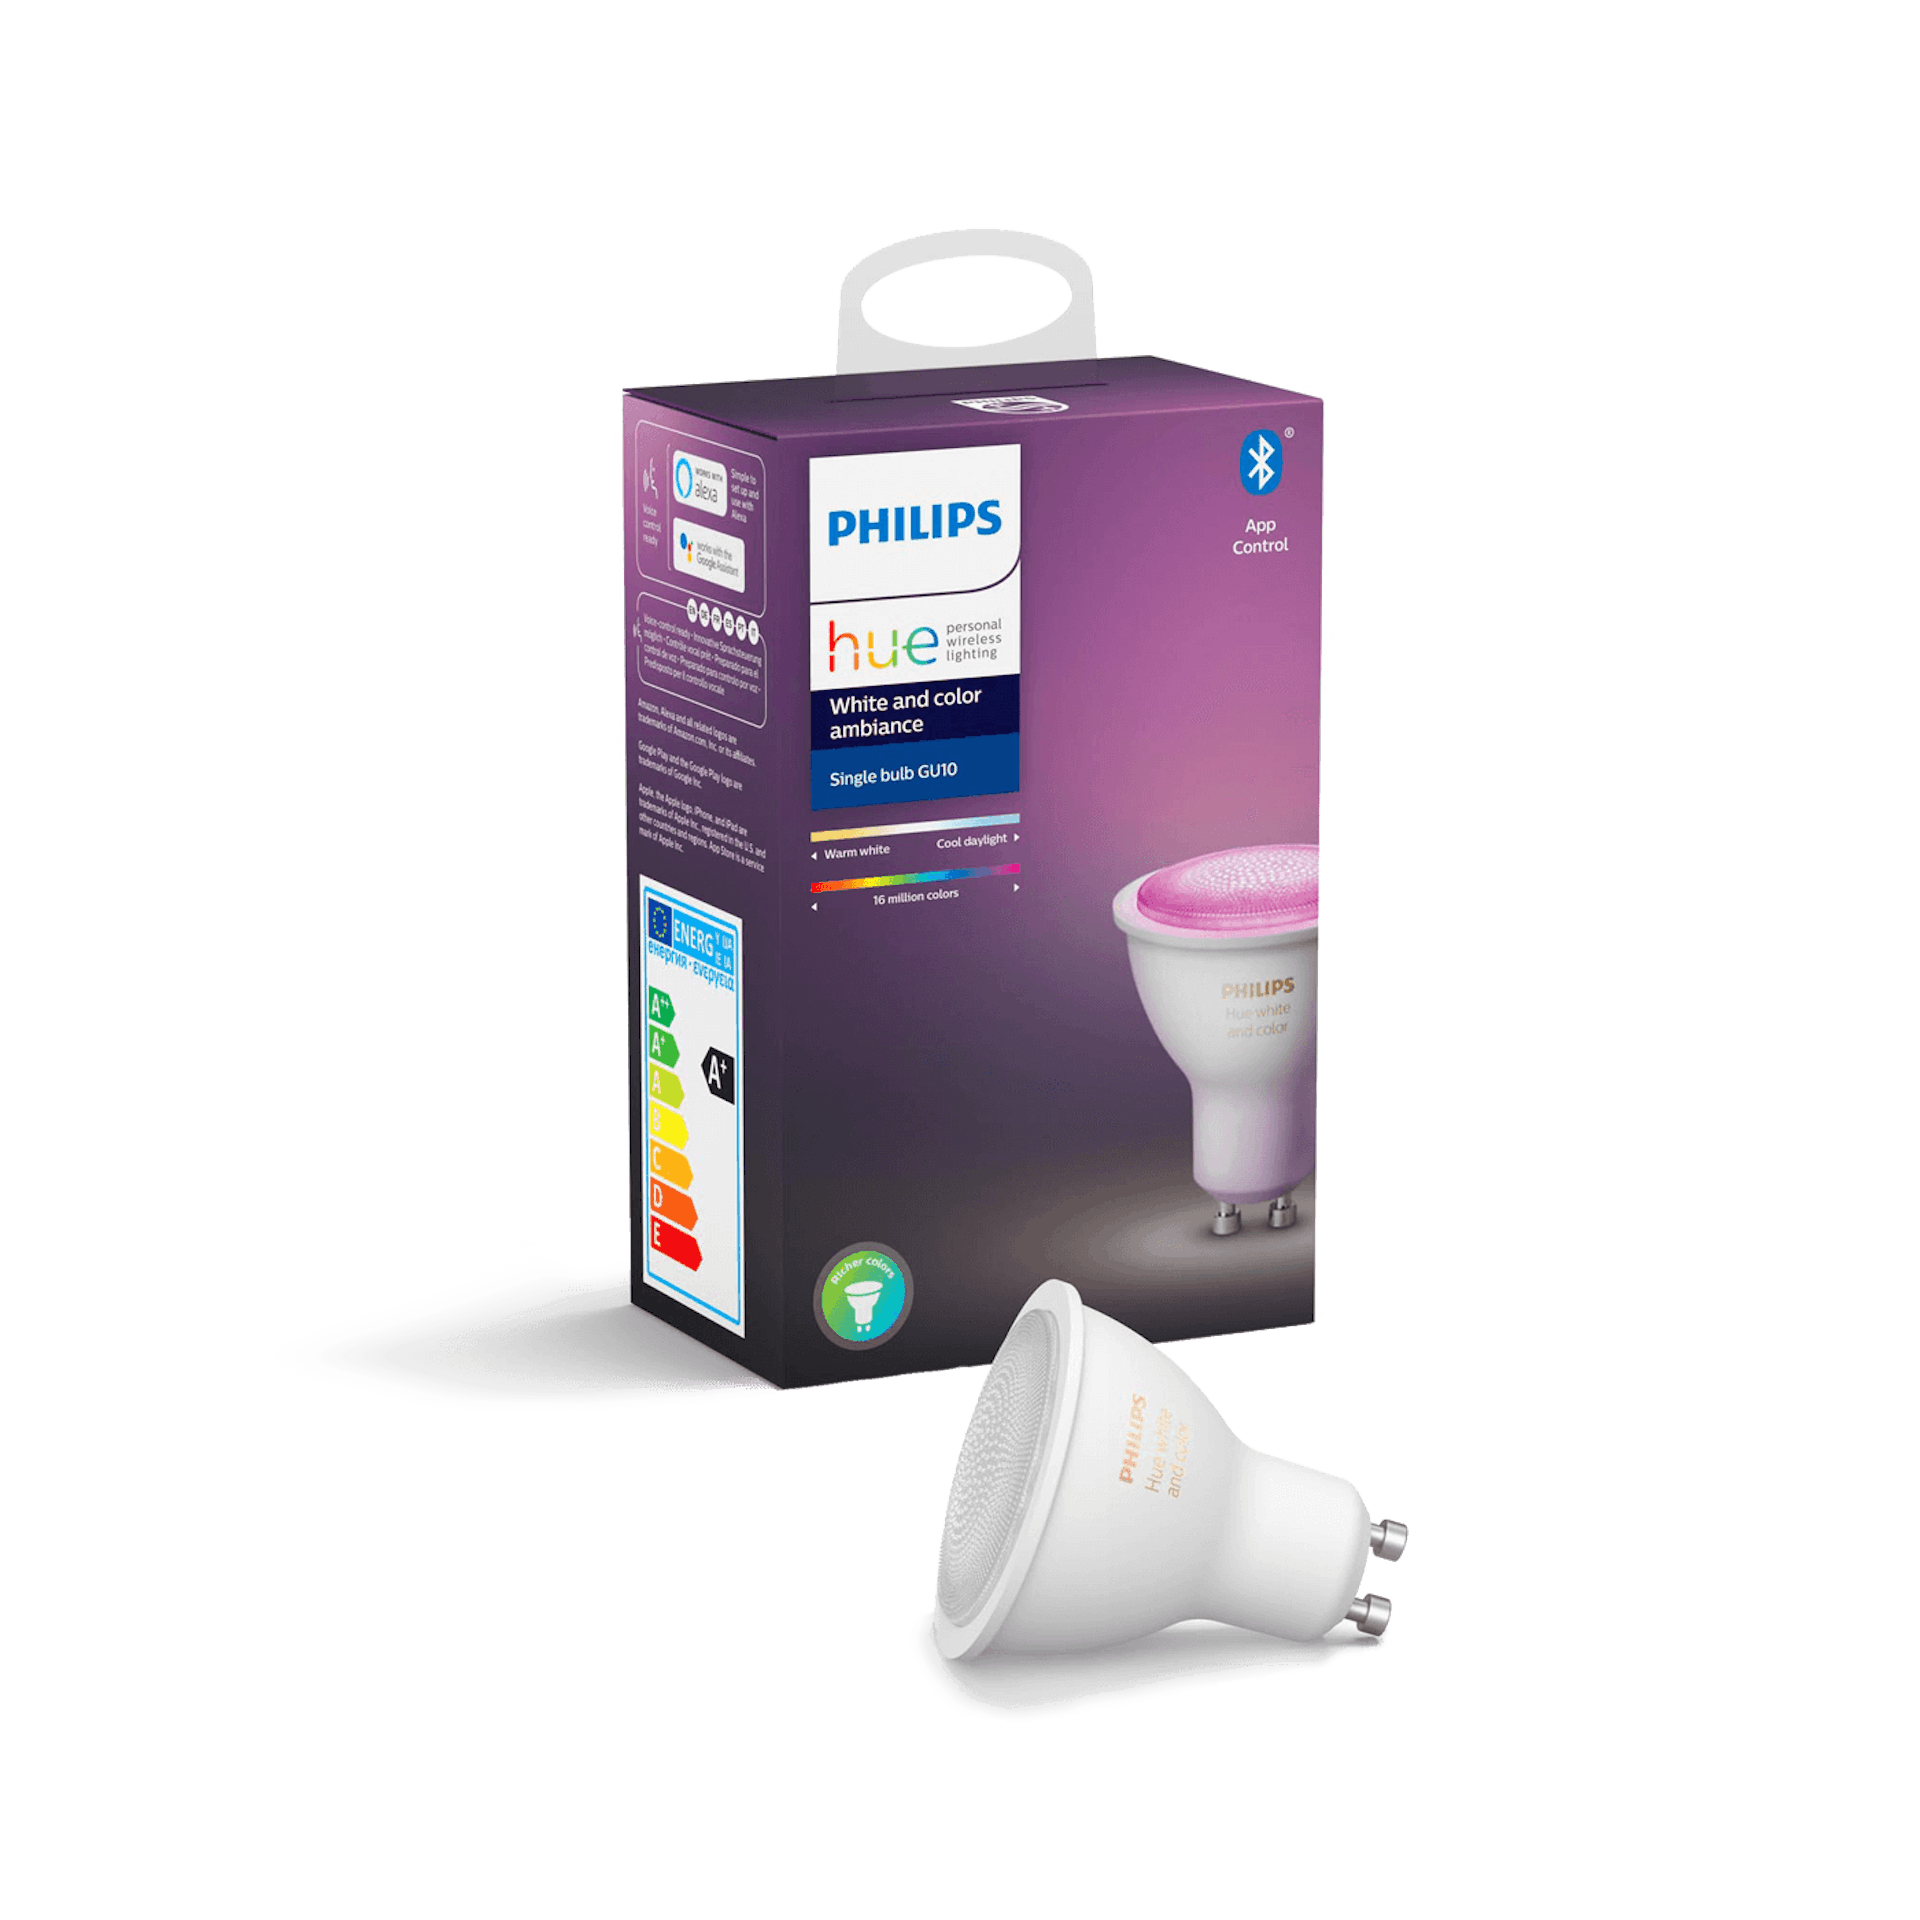 Philips Hue White/Color Ambiance GU10 - Image 2